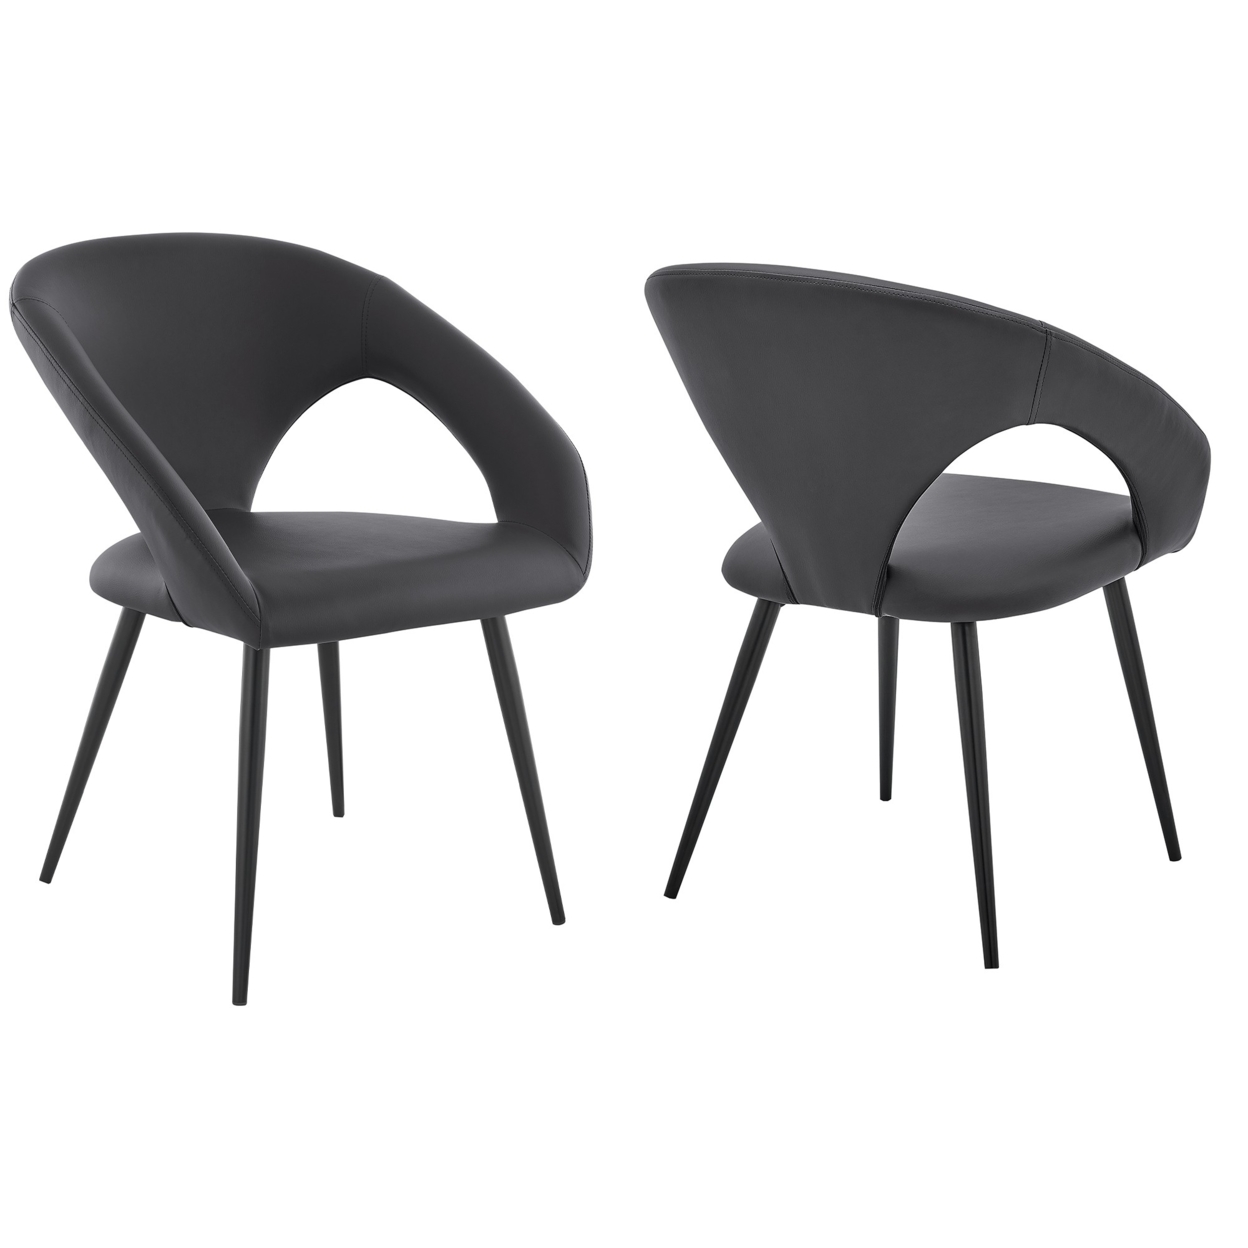 Elin Gray Faux Leather And Black Metal Dining Chairs - Set Of 2- Saltoro Sherpi